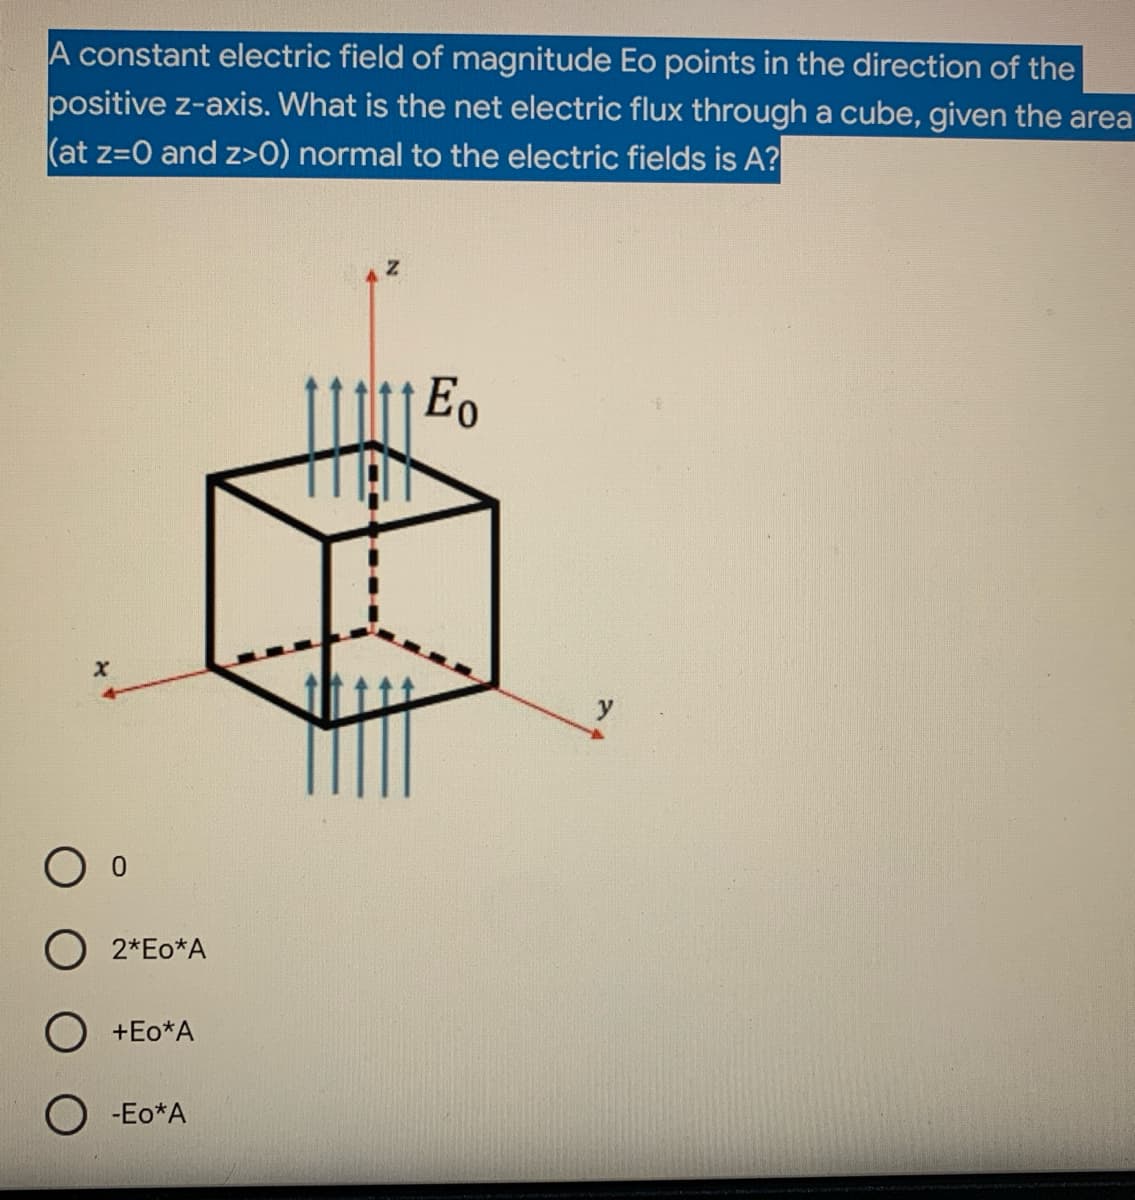 A constant electric field of magnitude Eo points in the direction of the
positive z-axis. What is the net electric flux through a cube, given the area
(at z=0 and z>0) normal to the electric fields is A?
Eo
O 0
O 2*Eo*A
+Eo*A
-Eo*A